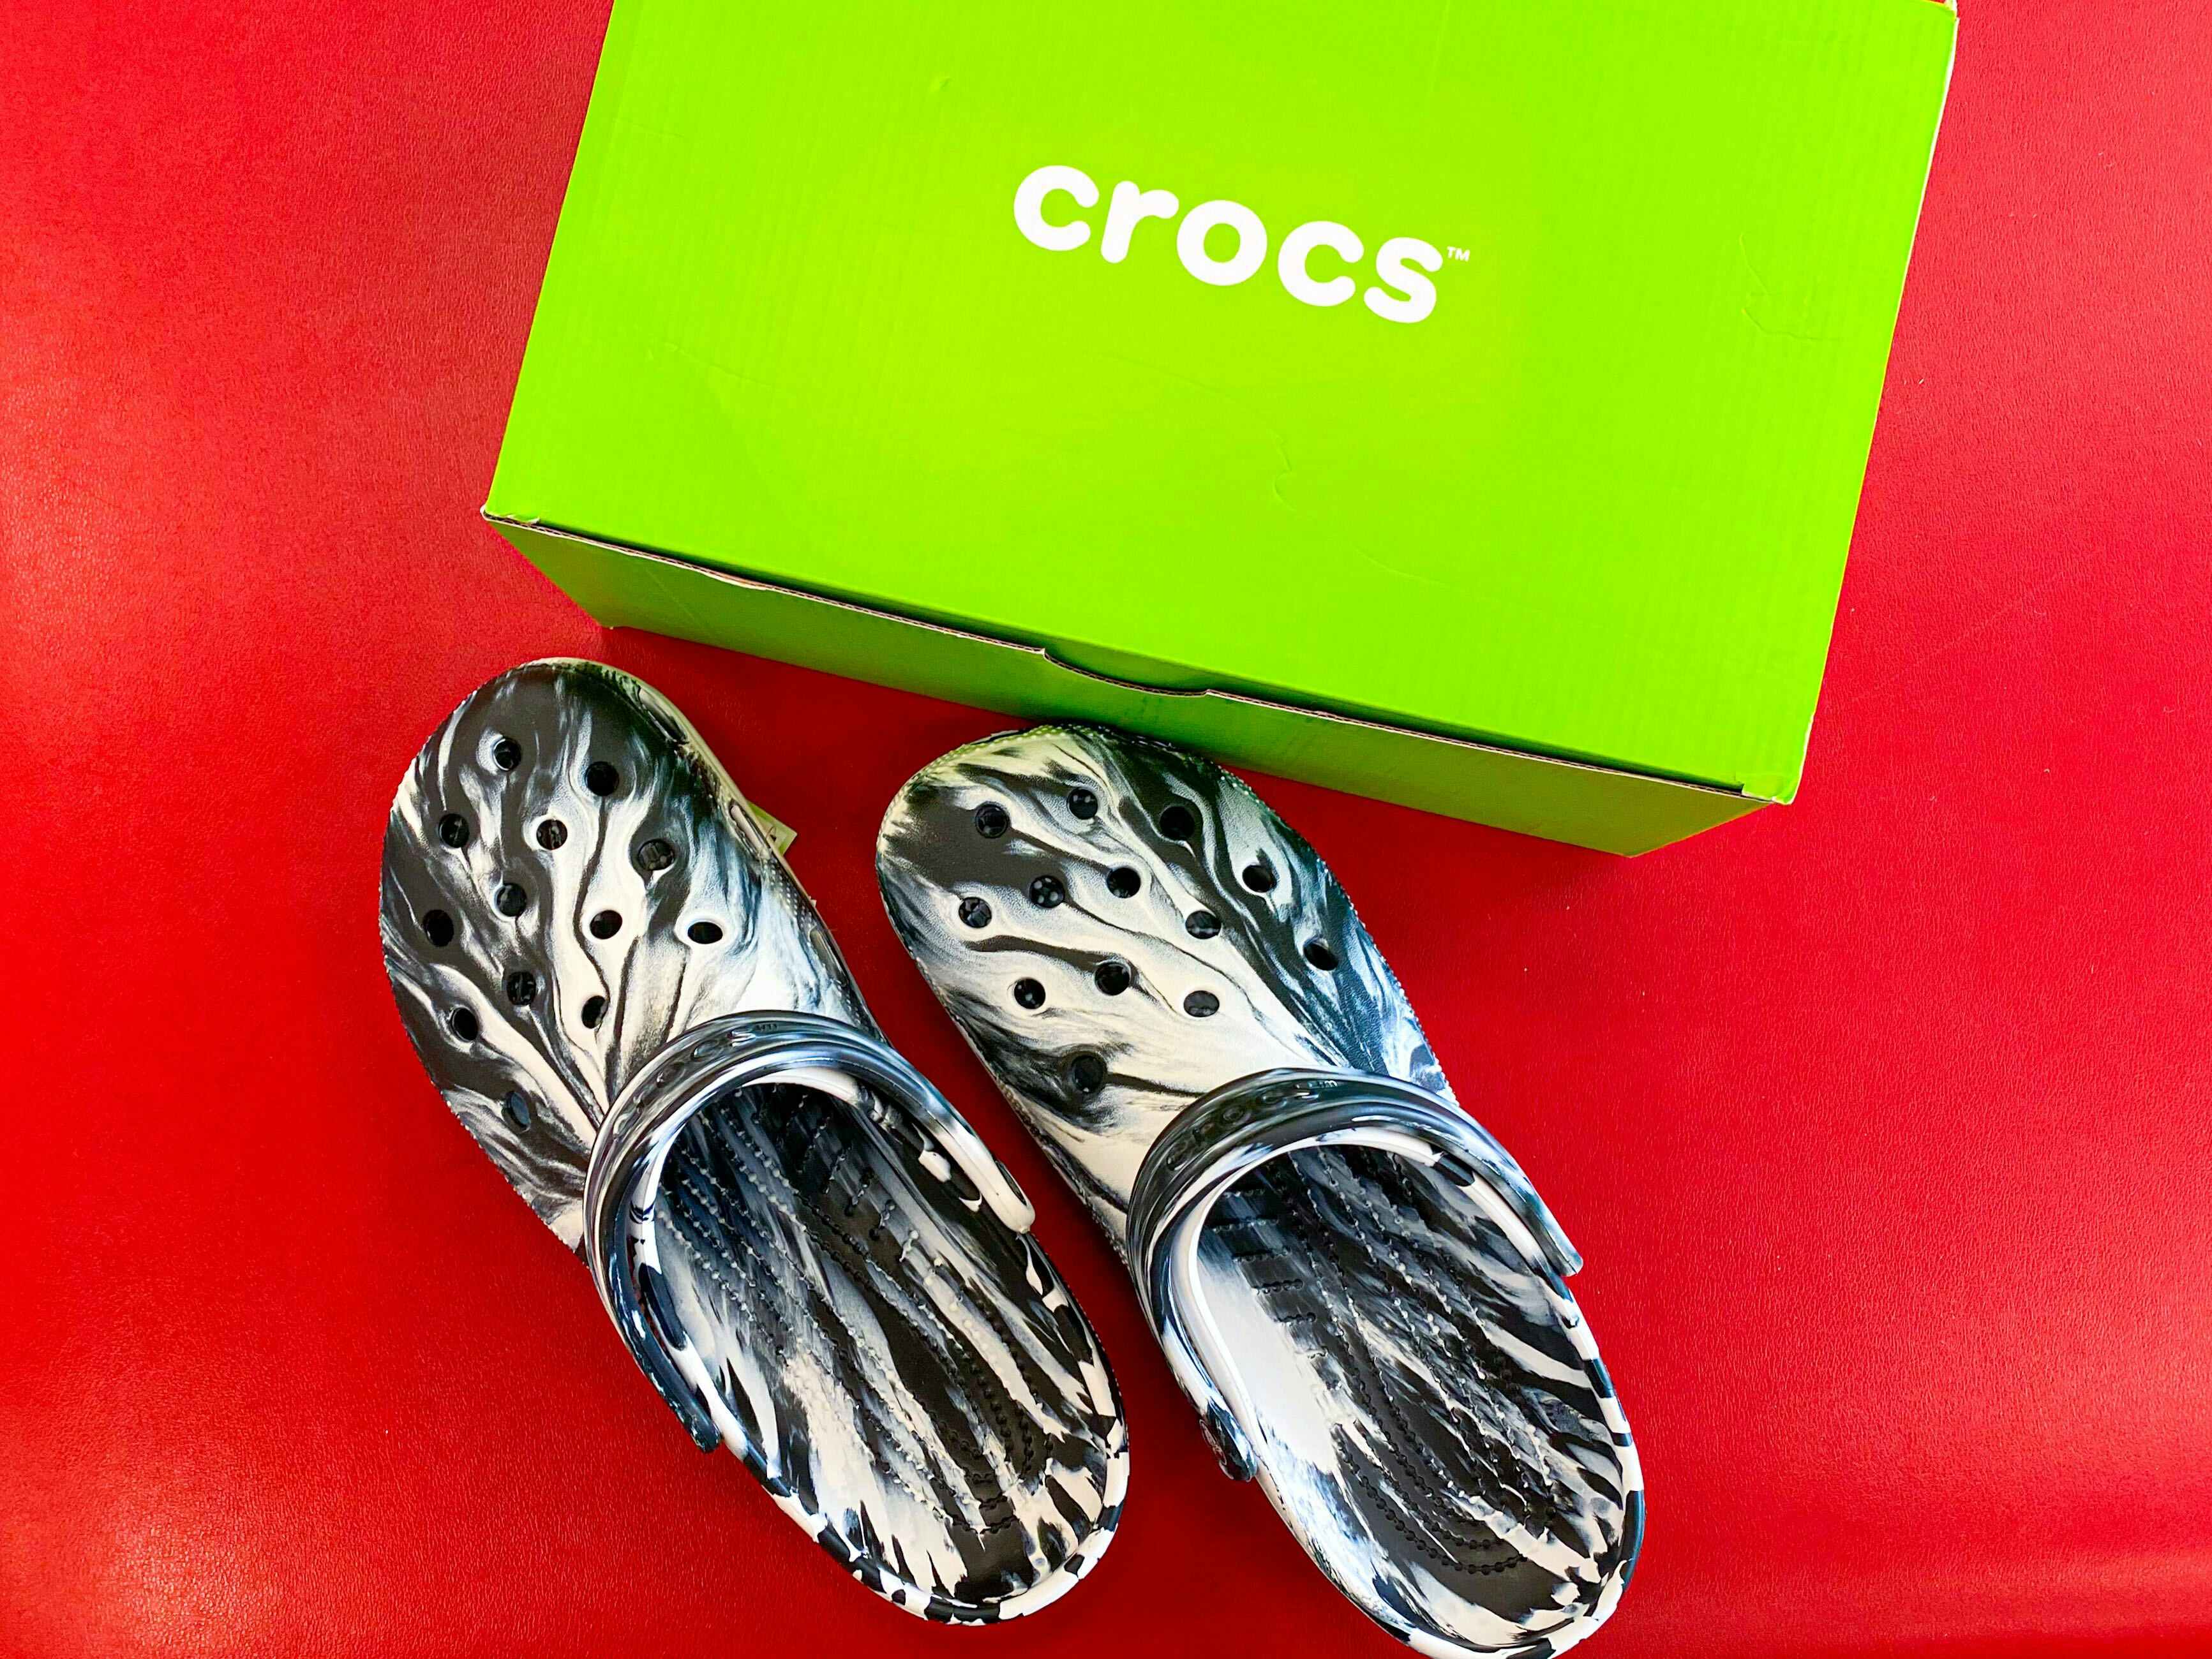 crocs clogs next to a green crocs box on a red surface